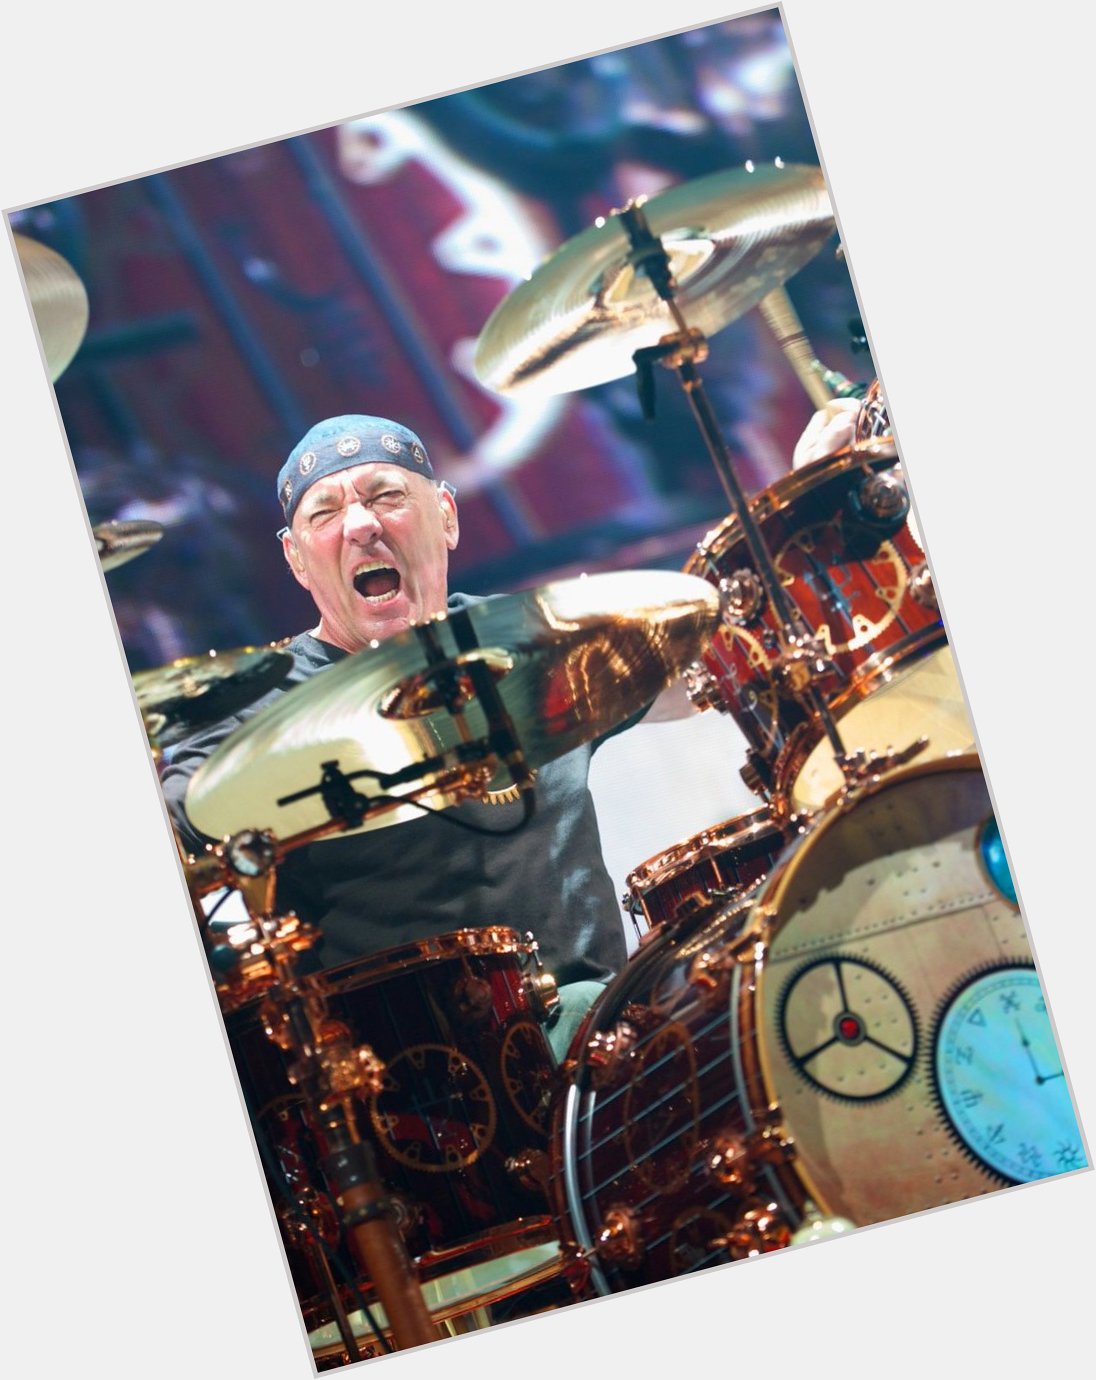 Happy 65th birthday to the greatest drummer on this planet, Neil Peart. 